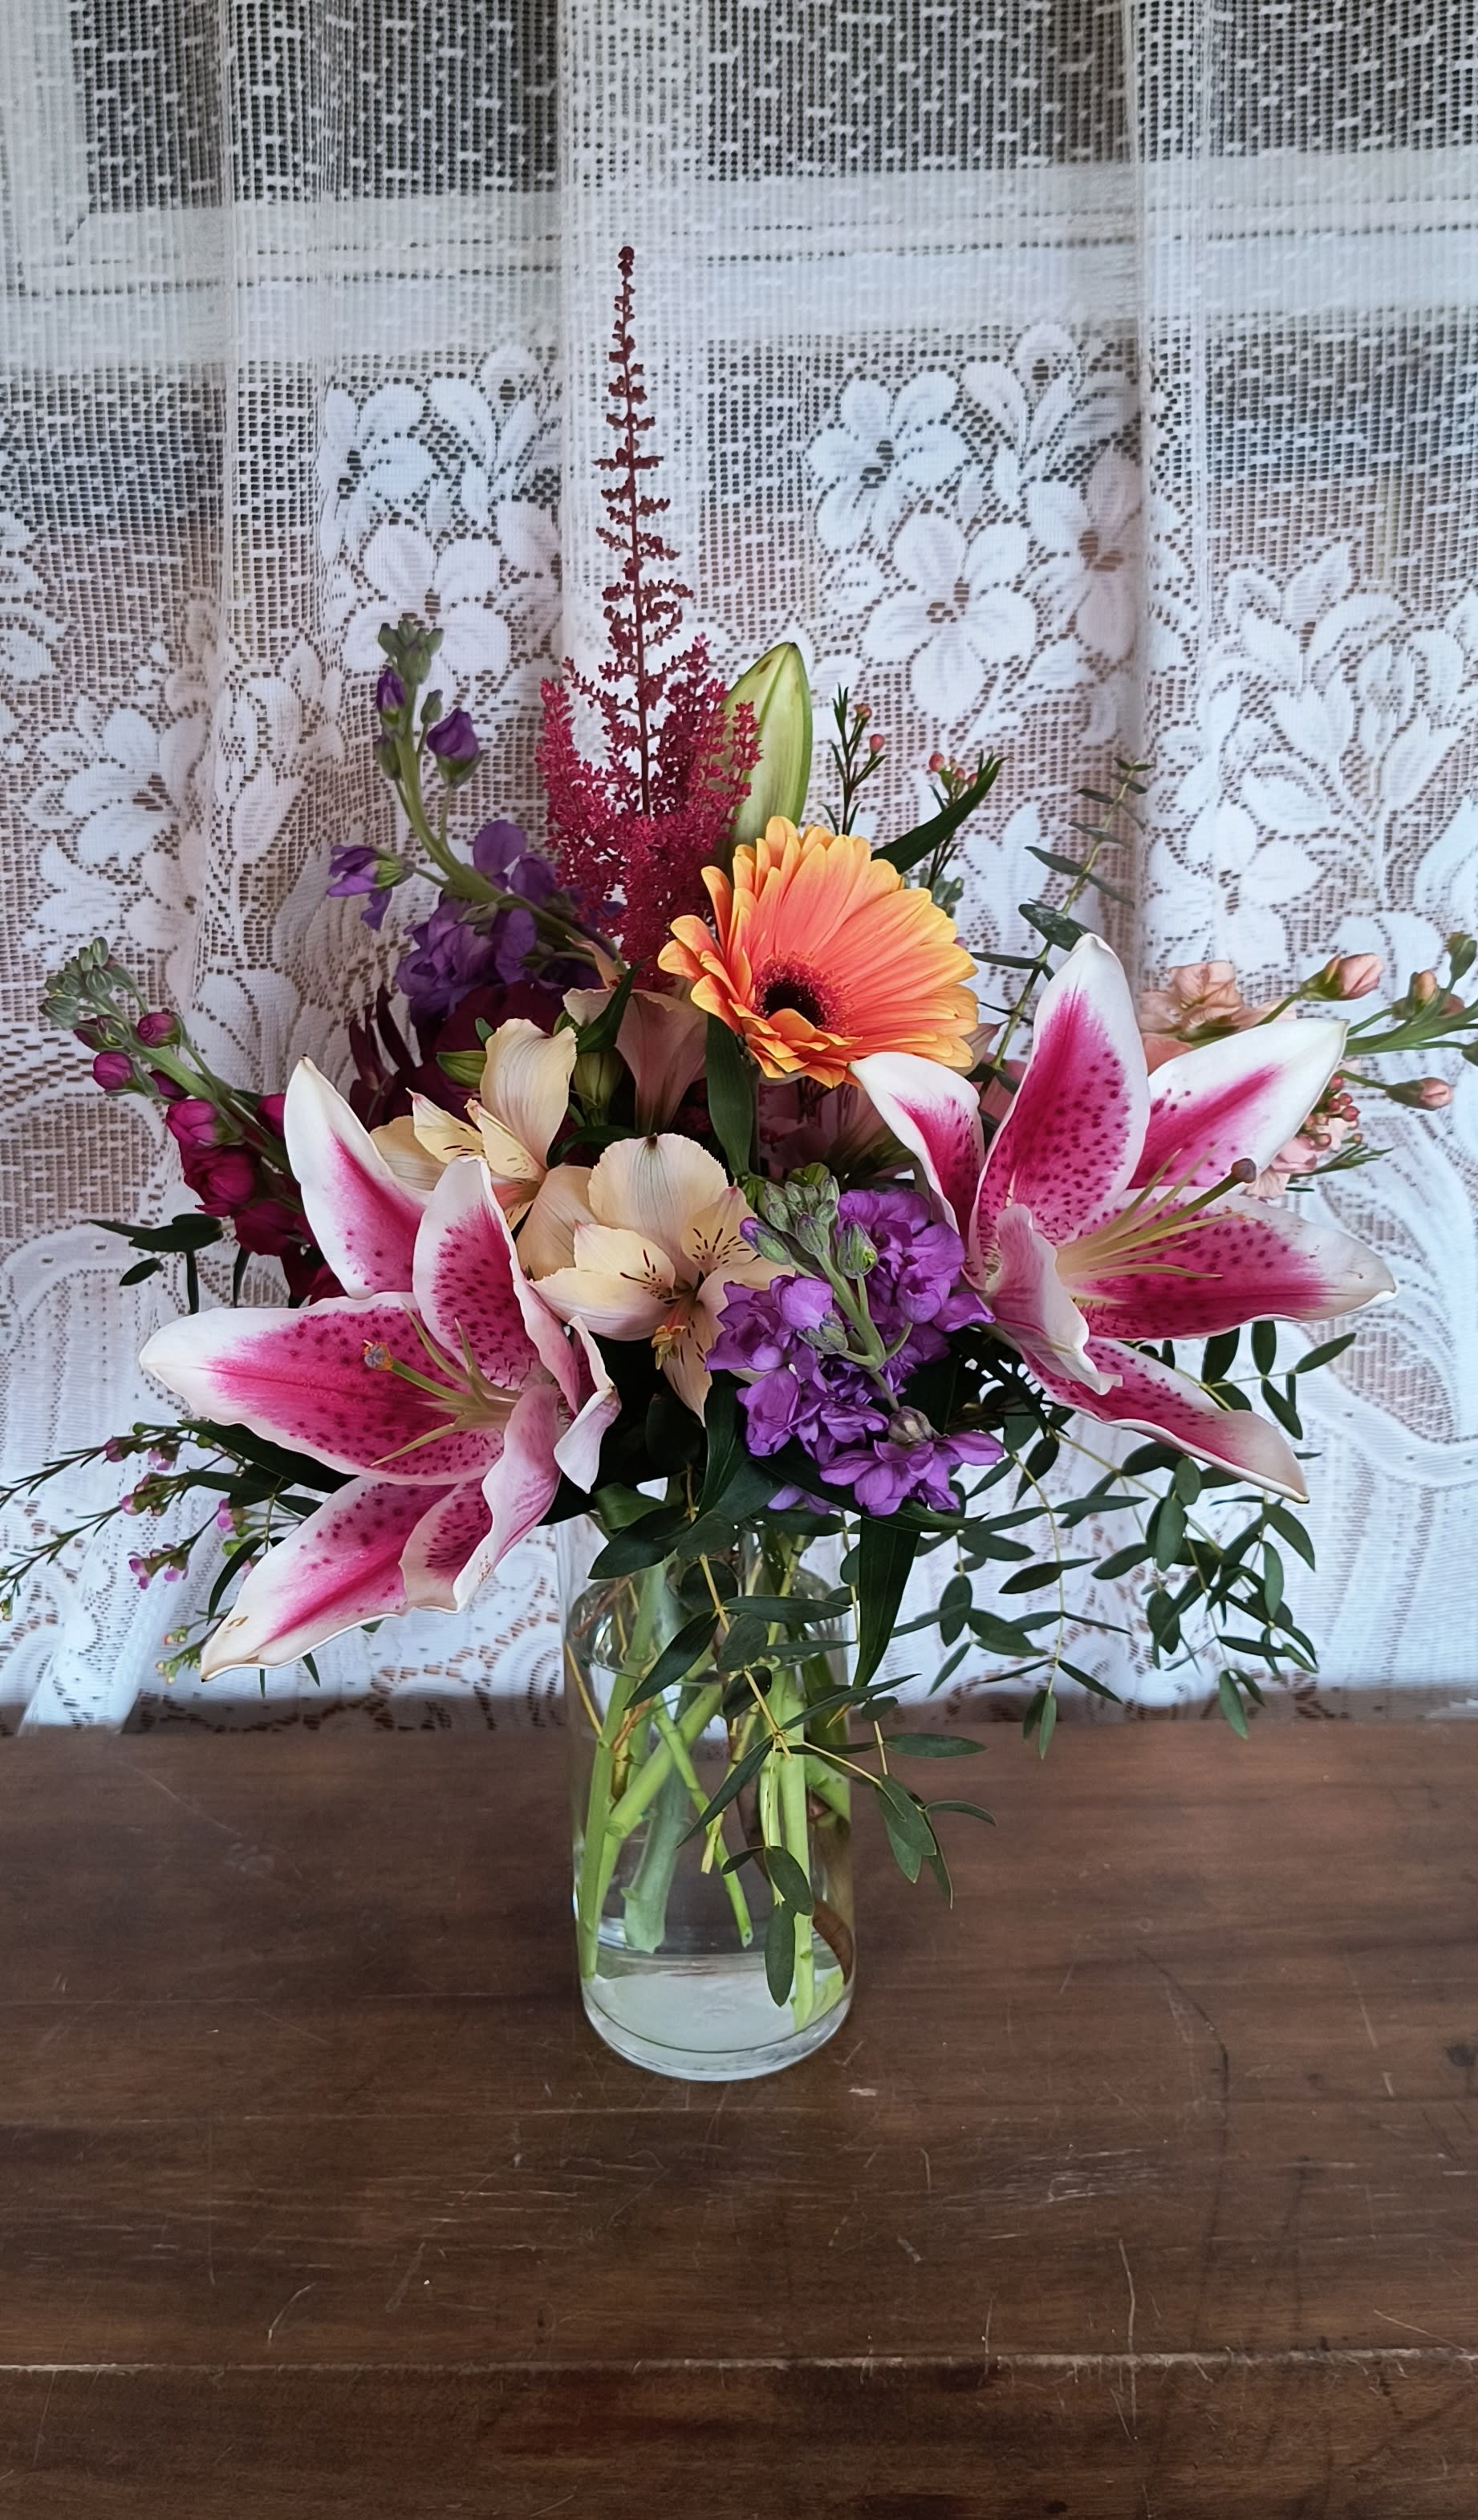 Designers Choice Country Garden - You can smell the garden! Designers choice of garden flowers arranged in a glass vase that may include alstroemeria, stock, lilies, gerberas and roses but not limited to.